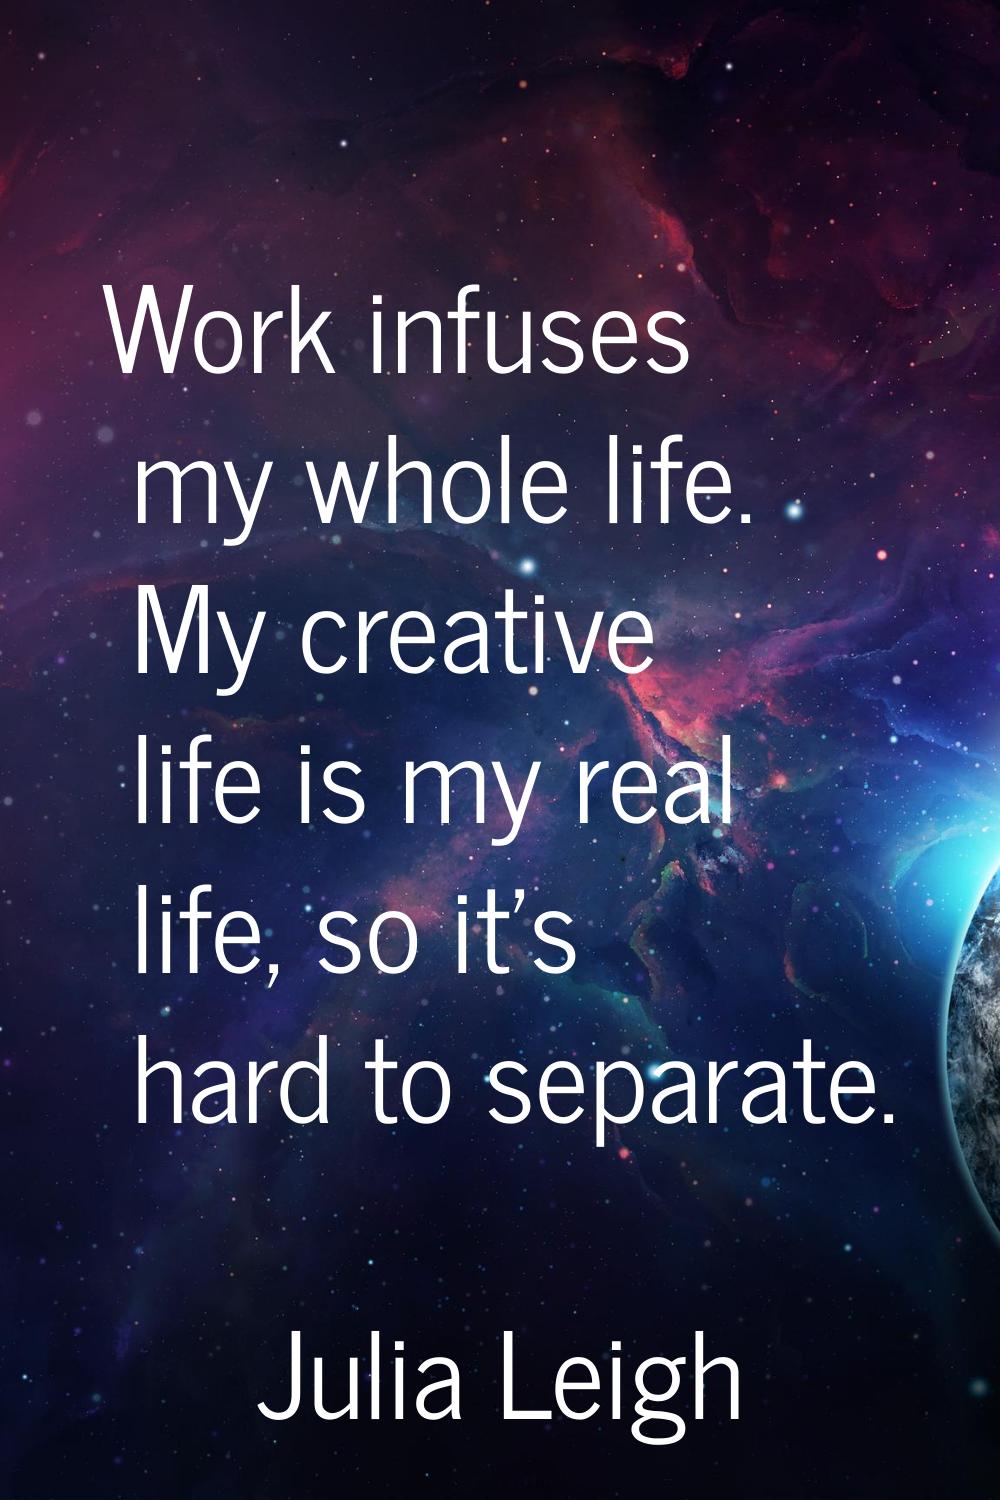 Work infuses my whole life. My creative life is my real life, so it's hard to separate.